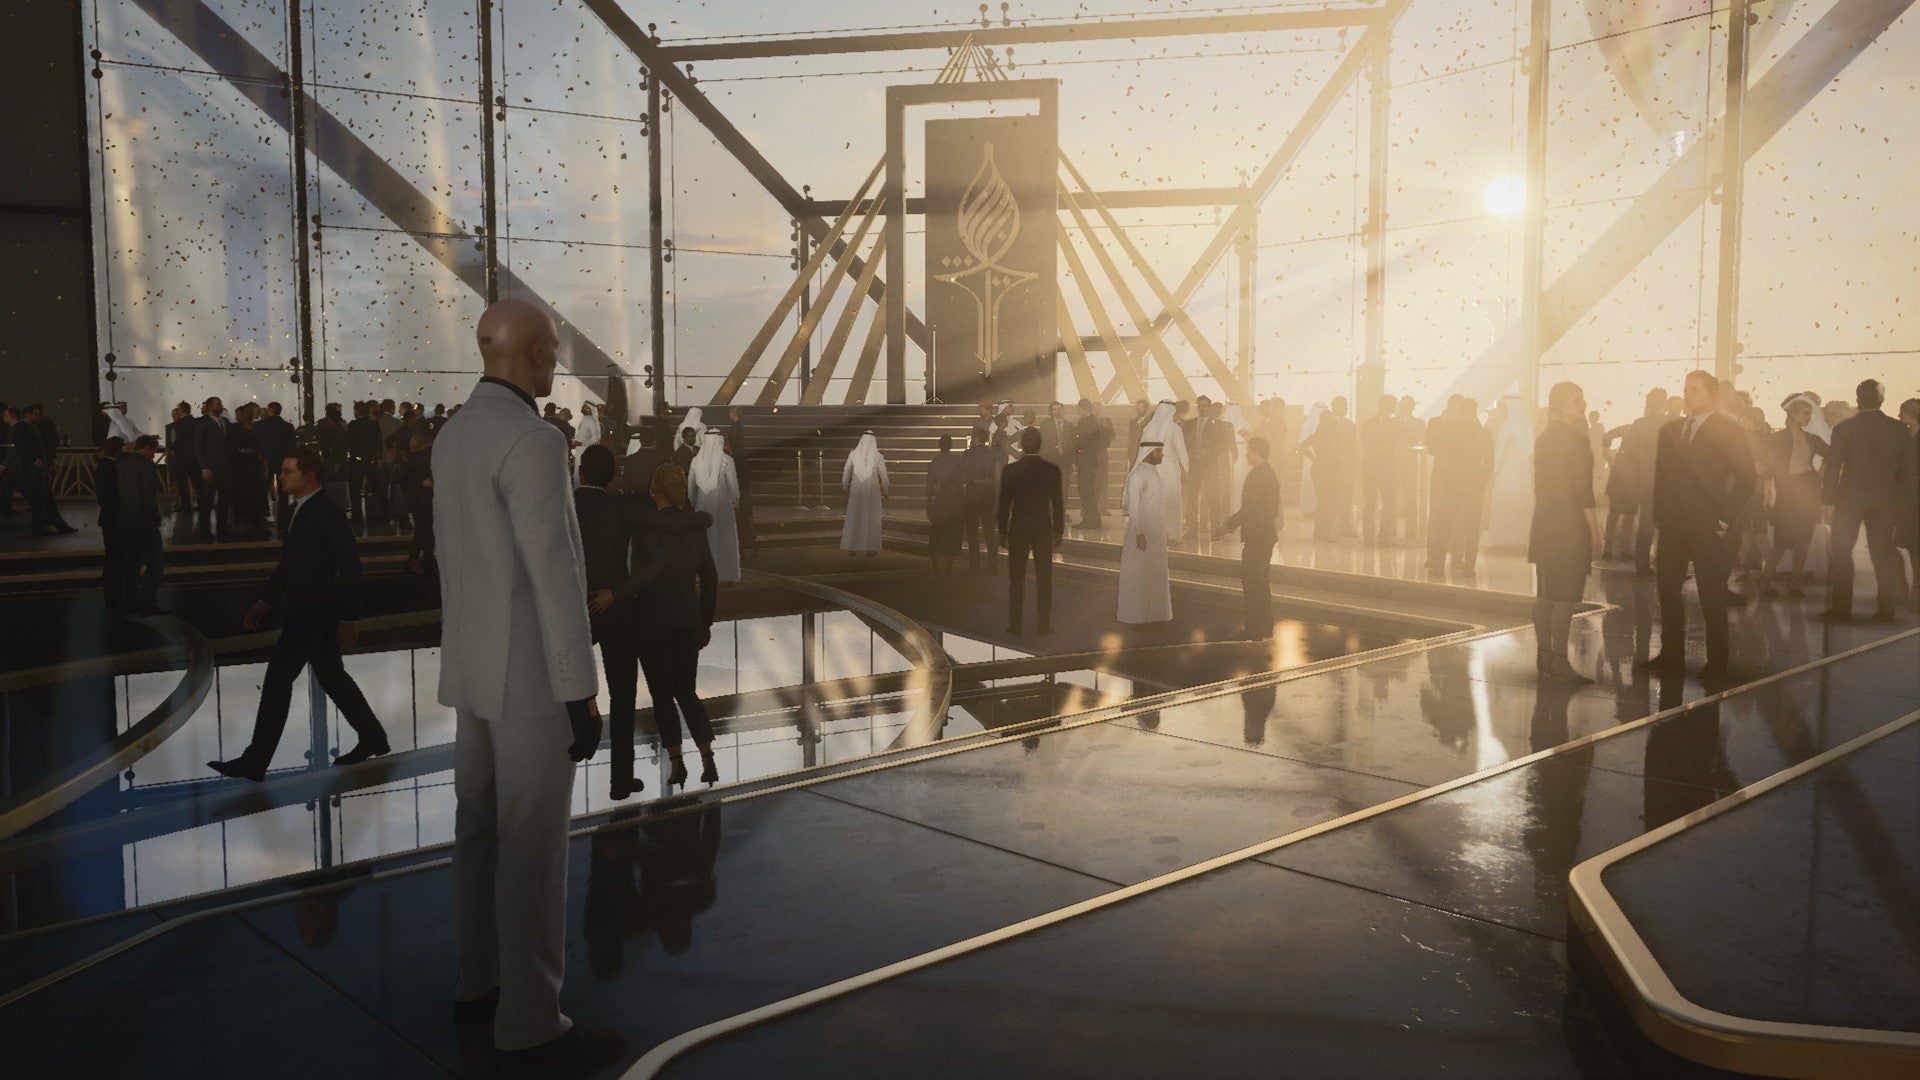 A screenshot of Agent 47 standing in a large glass atrium from Hitman 3's Dubai level